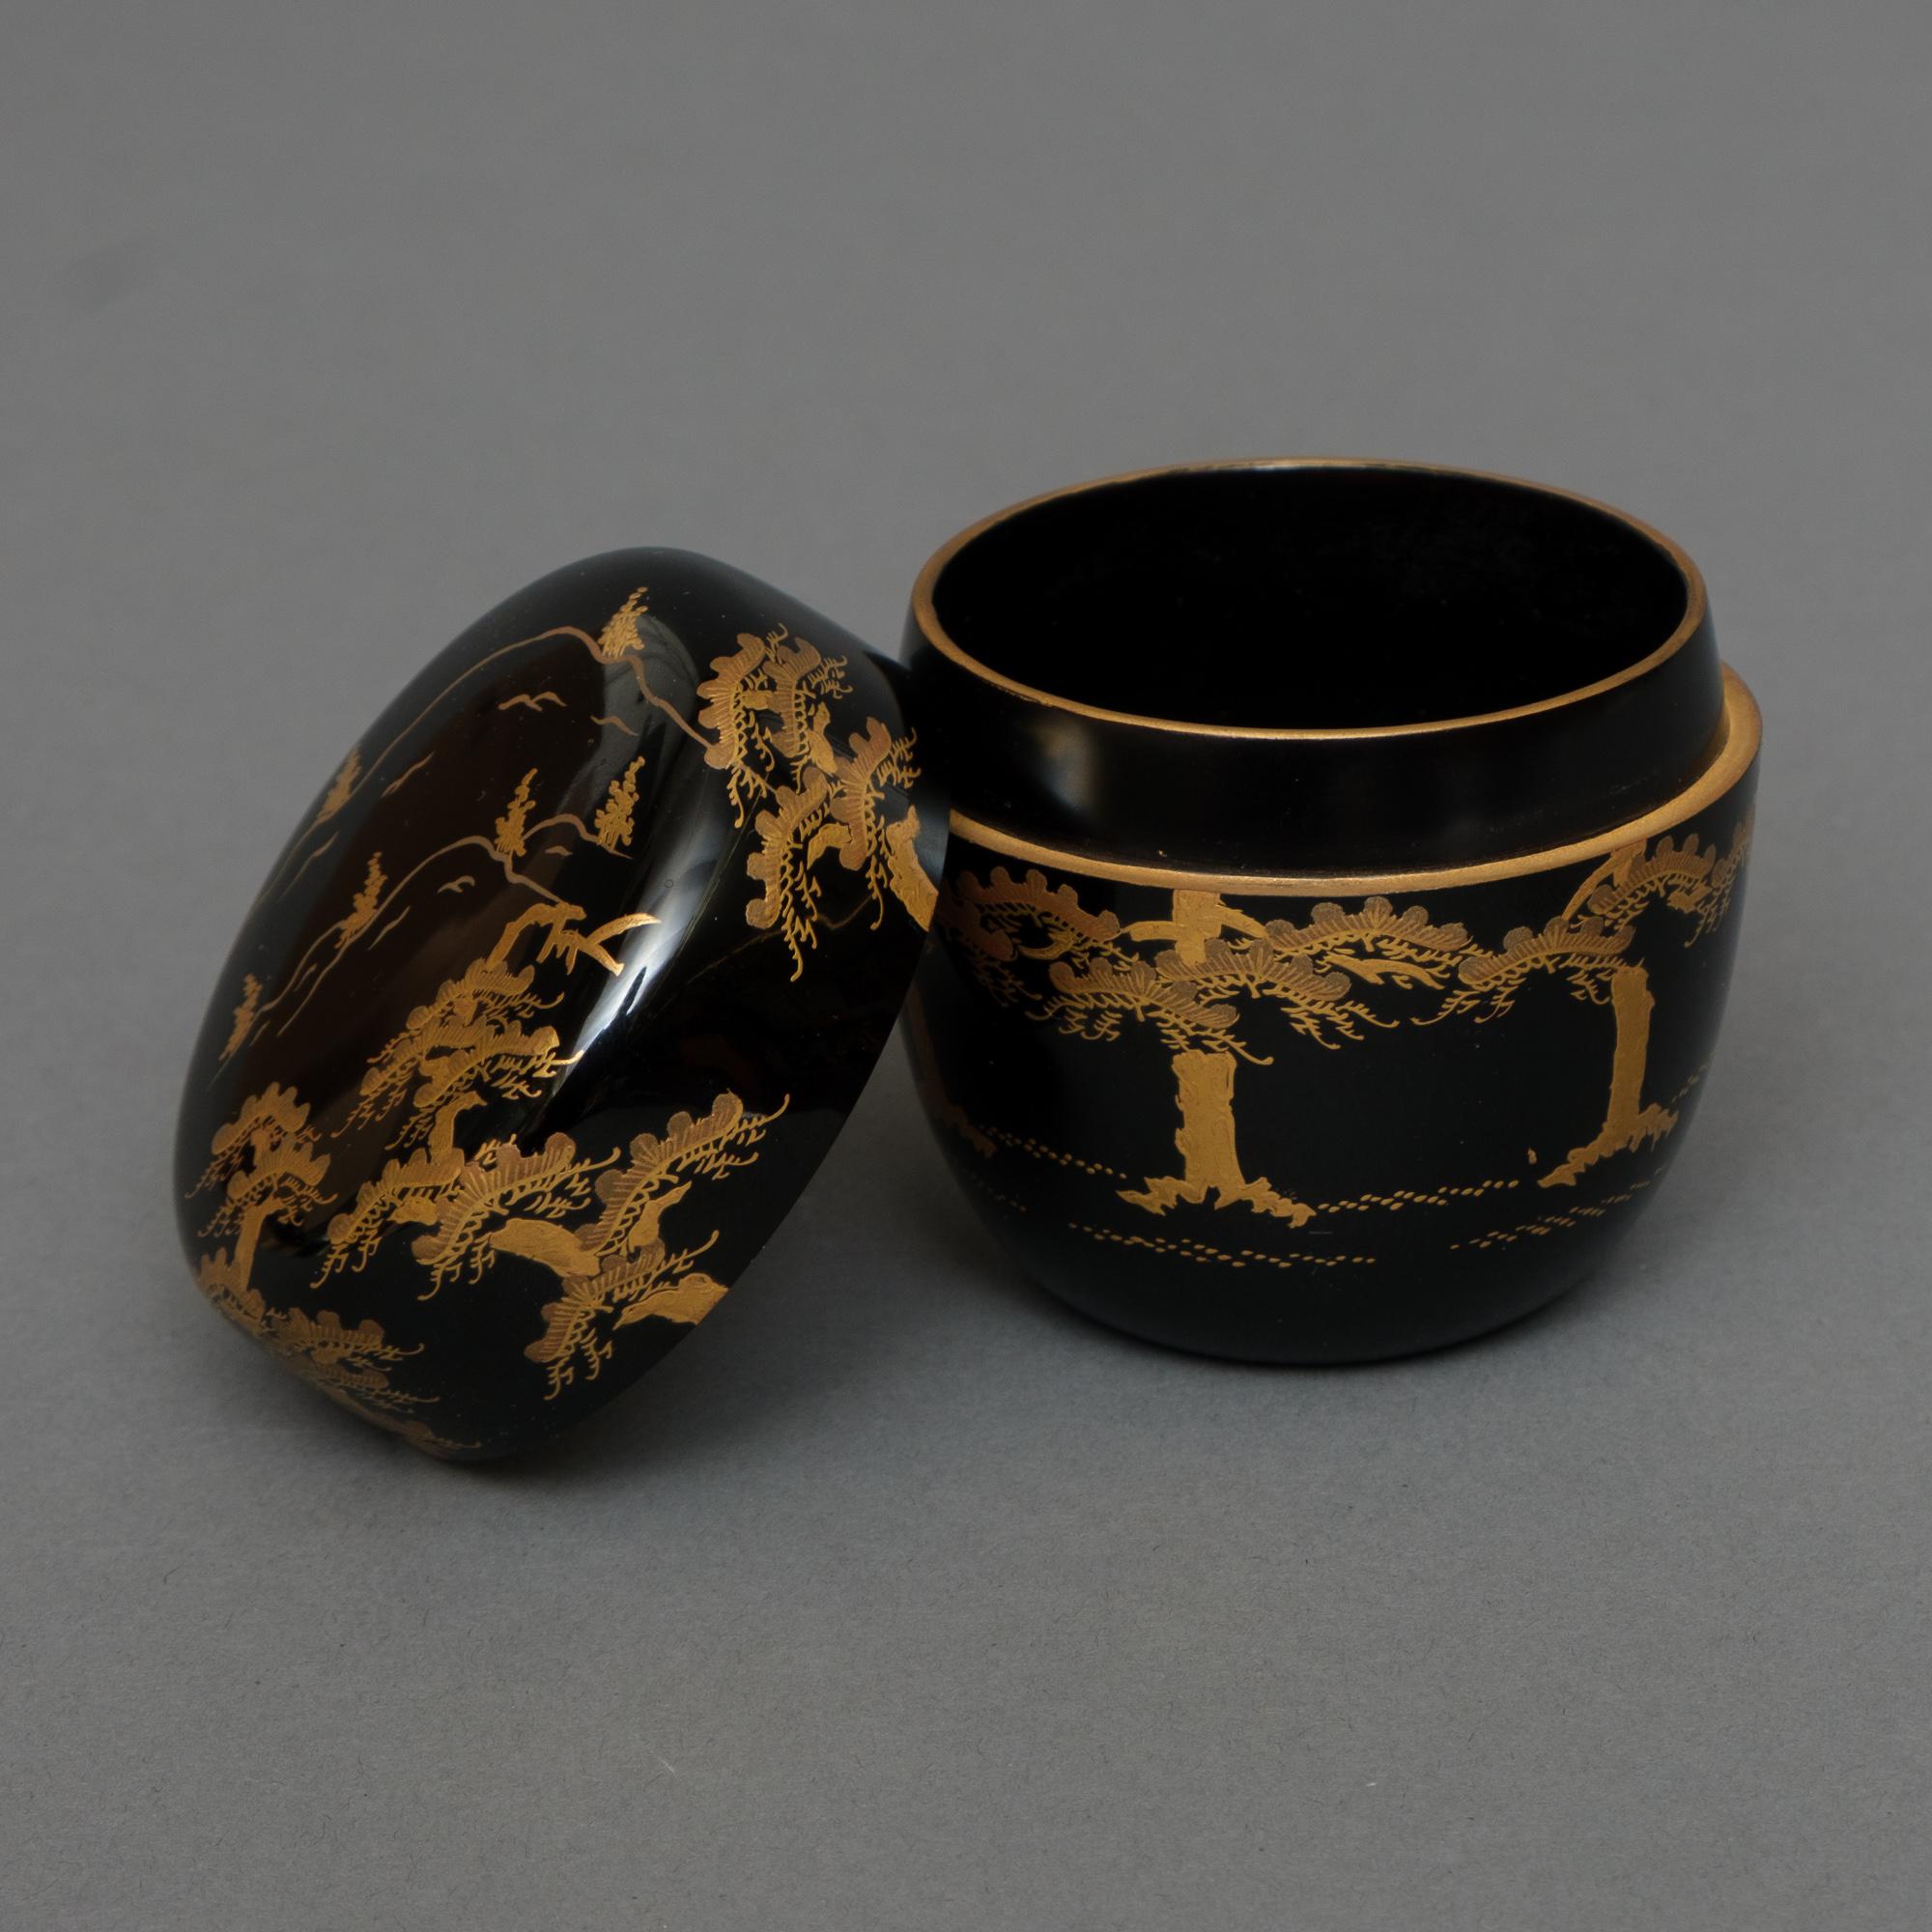 Pretty lacquer tea caddy (natsume) with refined hiramaki-e (low-relief lacquer design) showcasing a pine tree forest (matsu) at the base of a mountain.
Executed in shades of gold lacquer on a glossy black lacquer substrate ground. The interior done